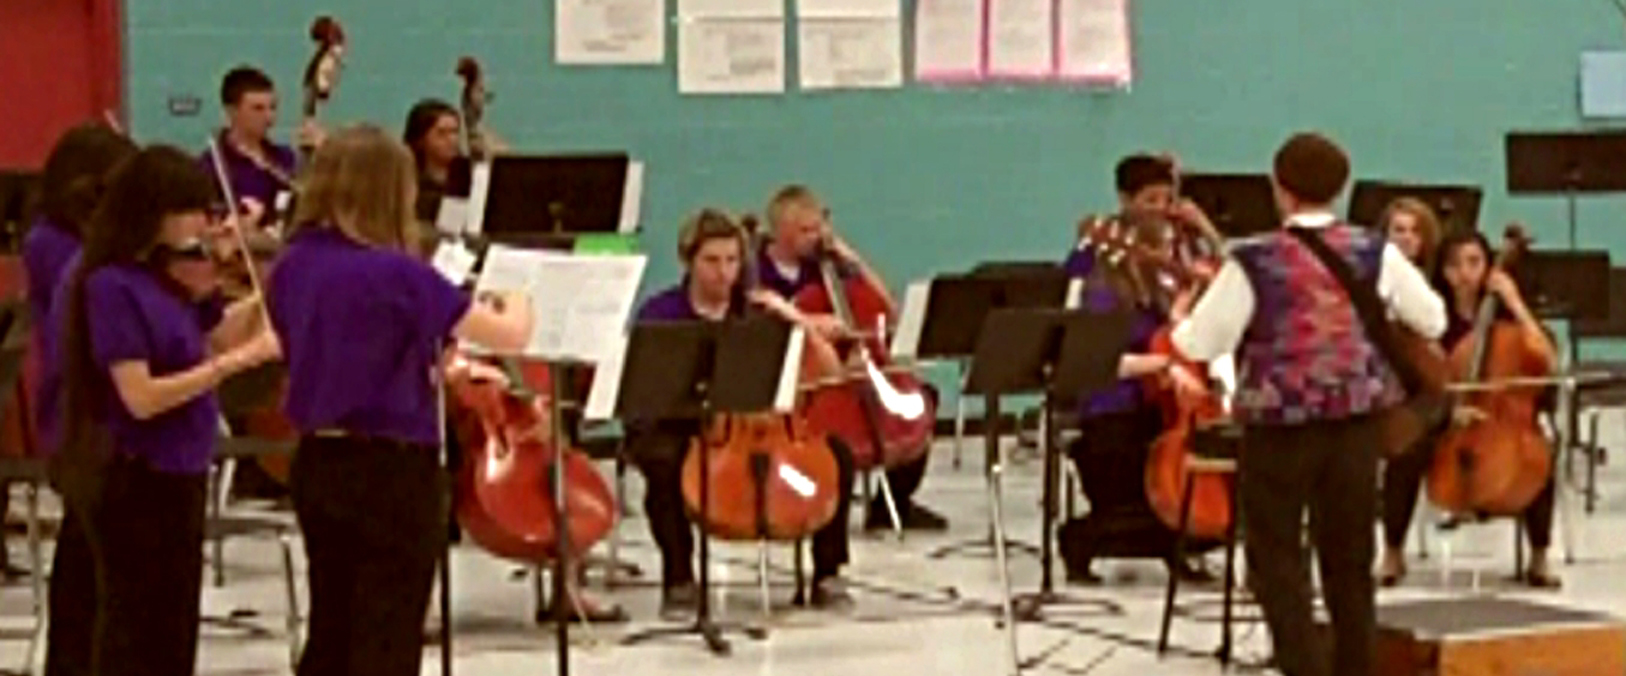 Click to see the Hi-Dukes youth orchestra program